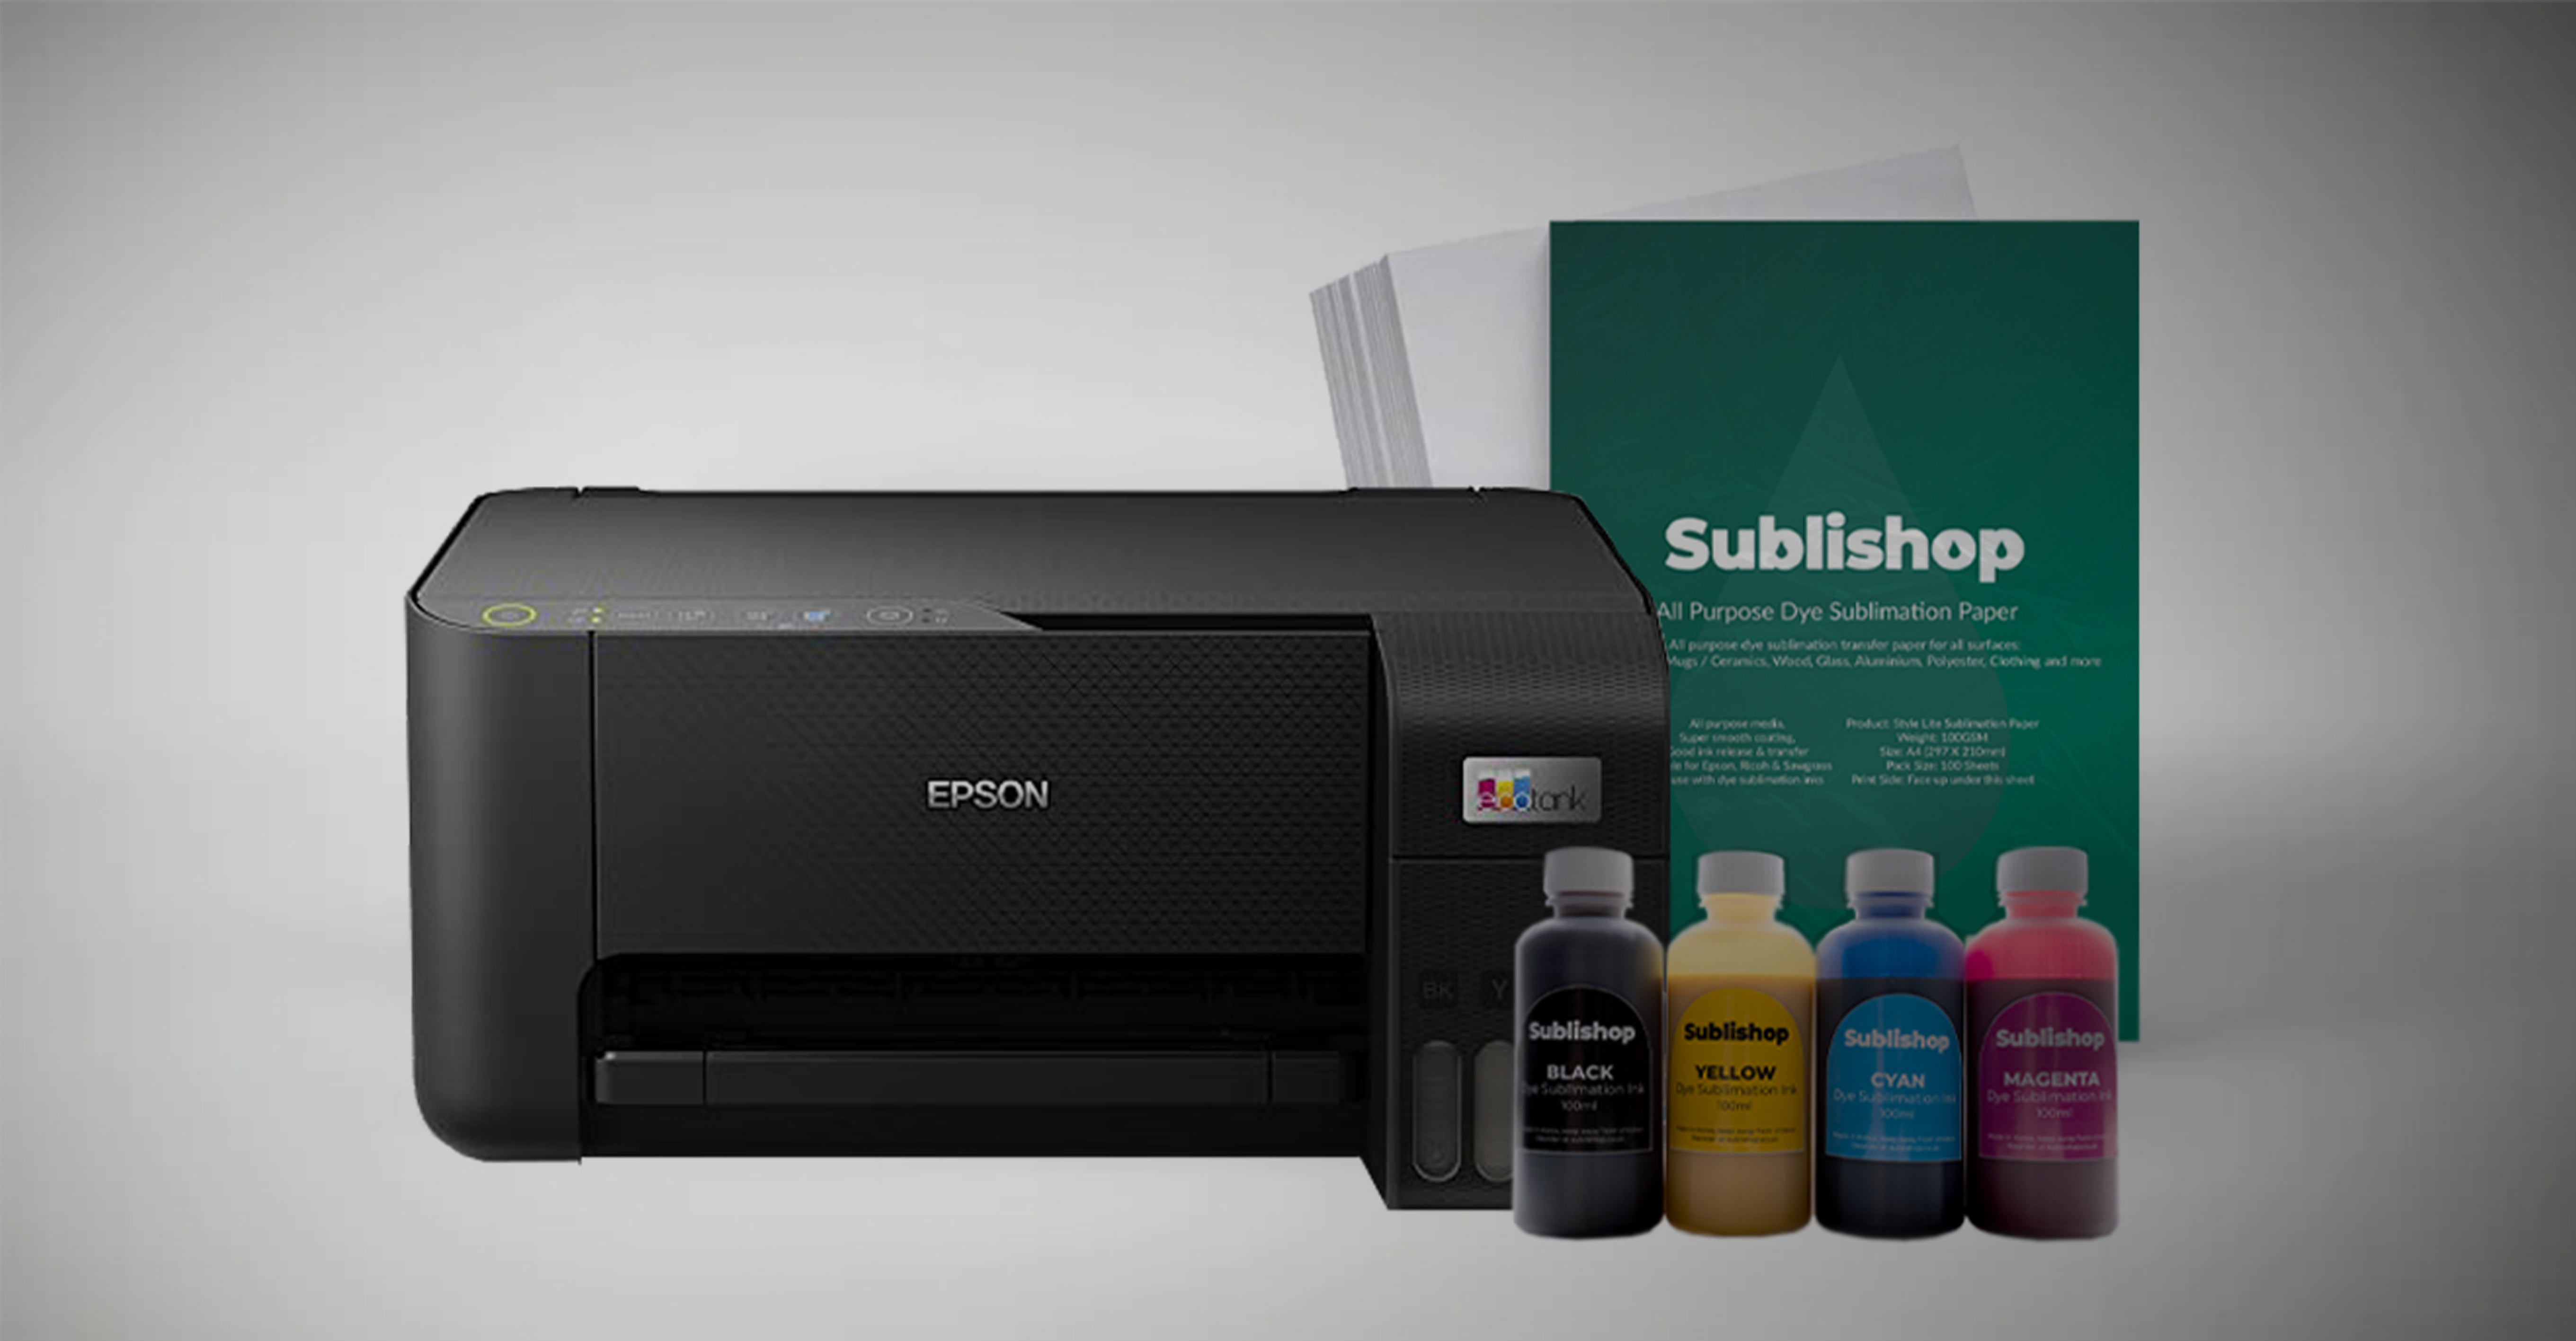 Top 10 Budget Printers For Sublimation